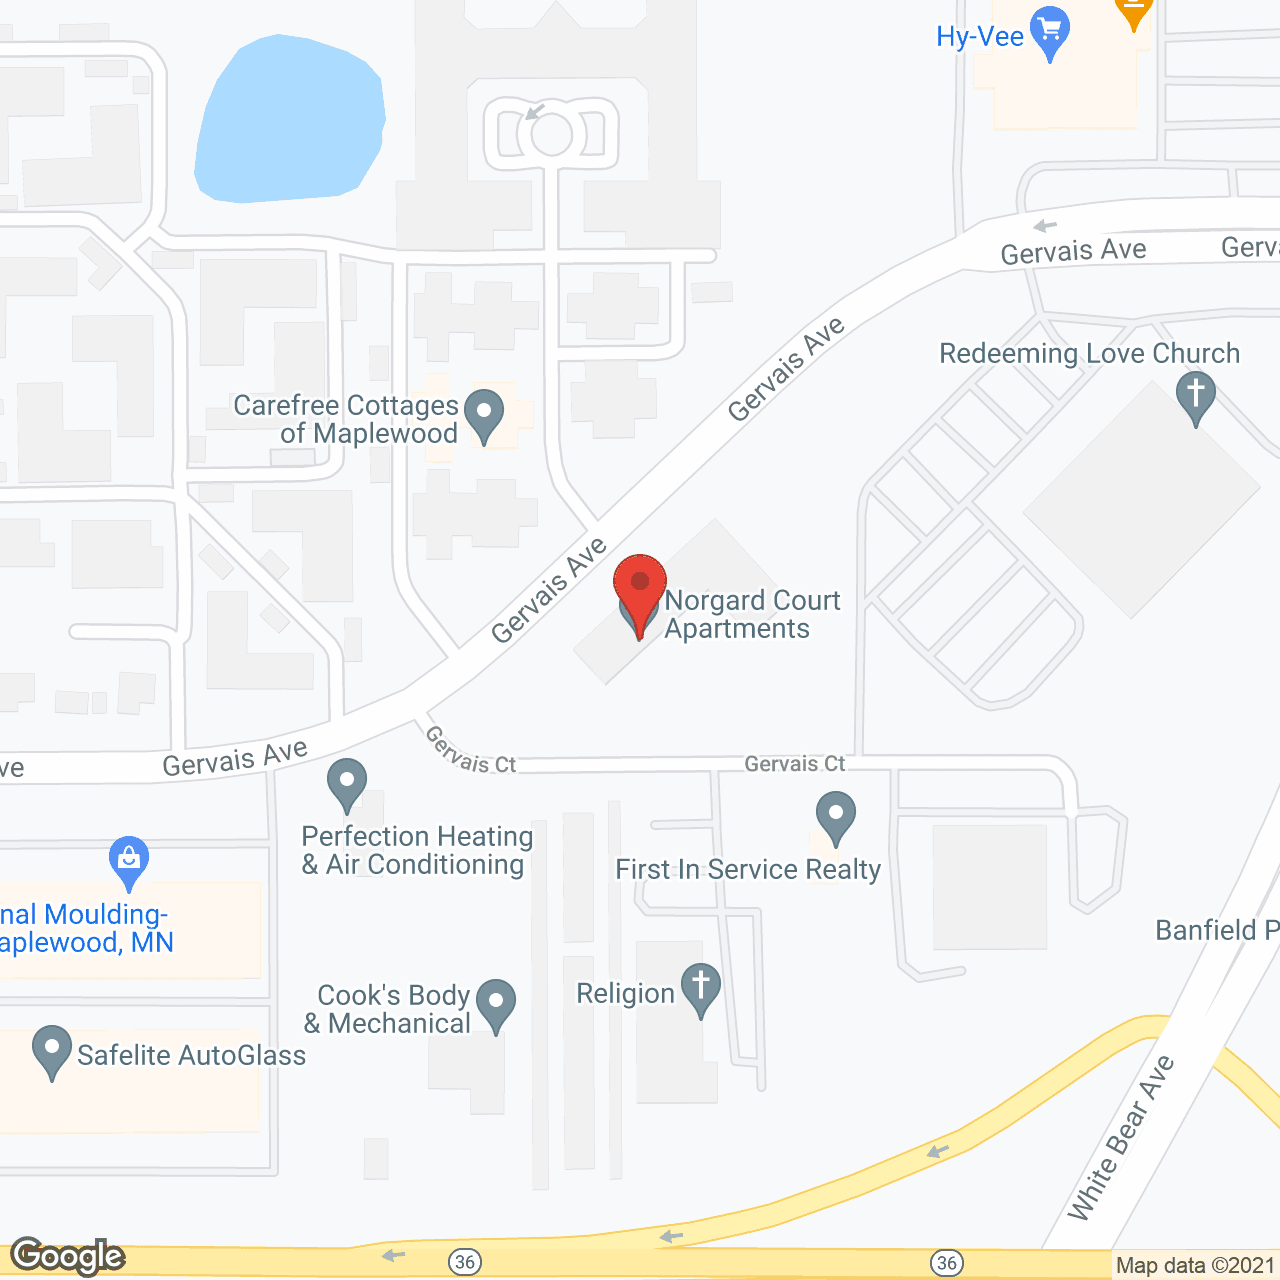 Norgard Court Apartments in google map